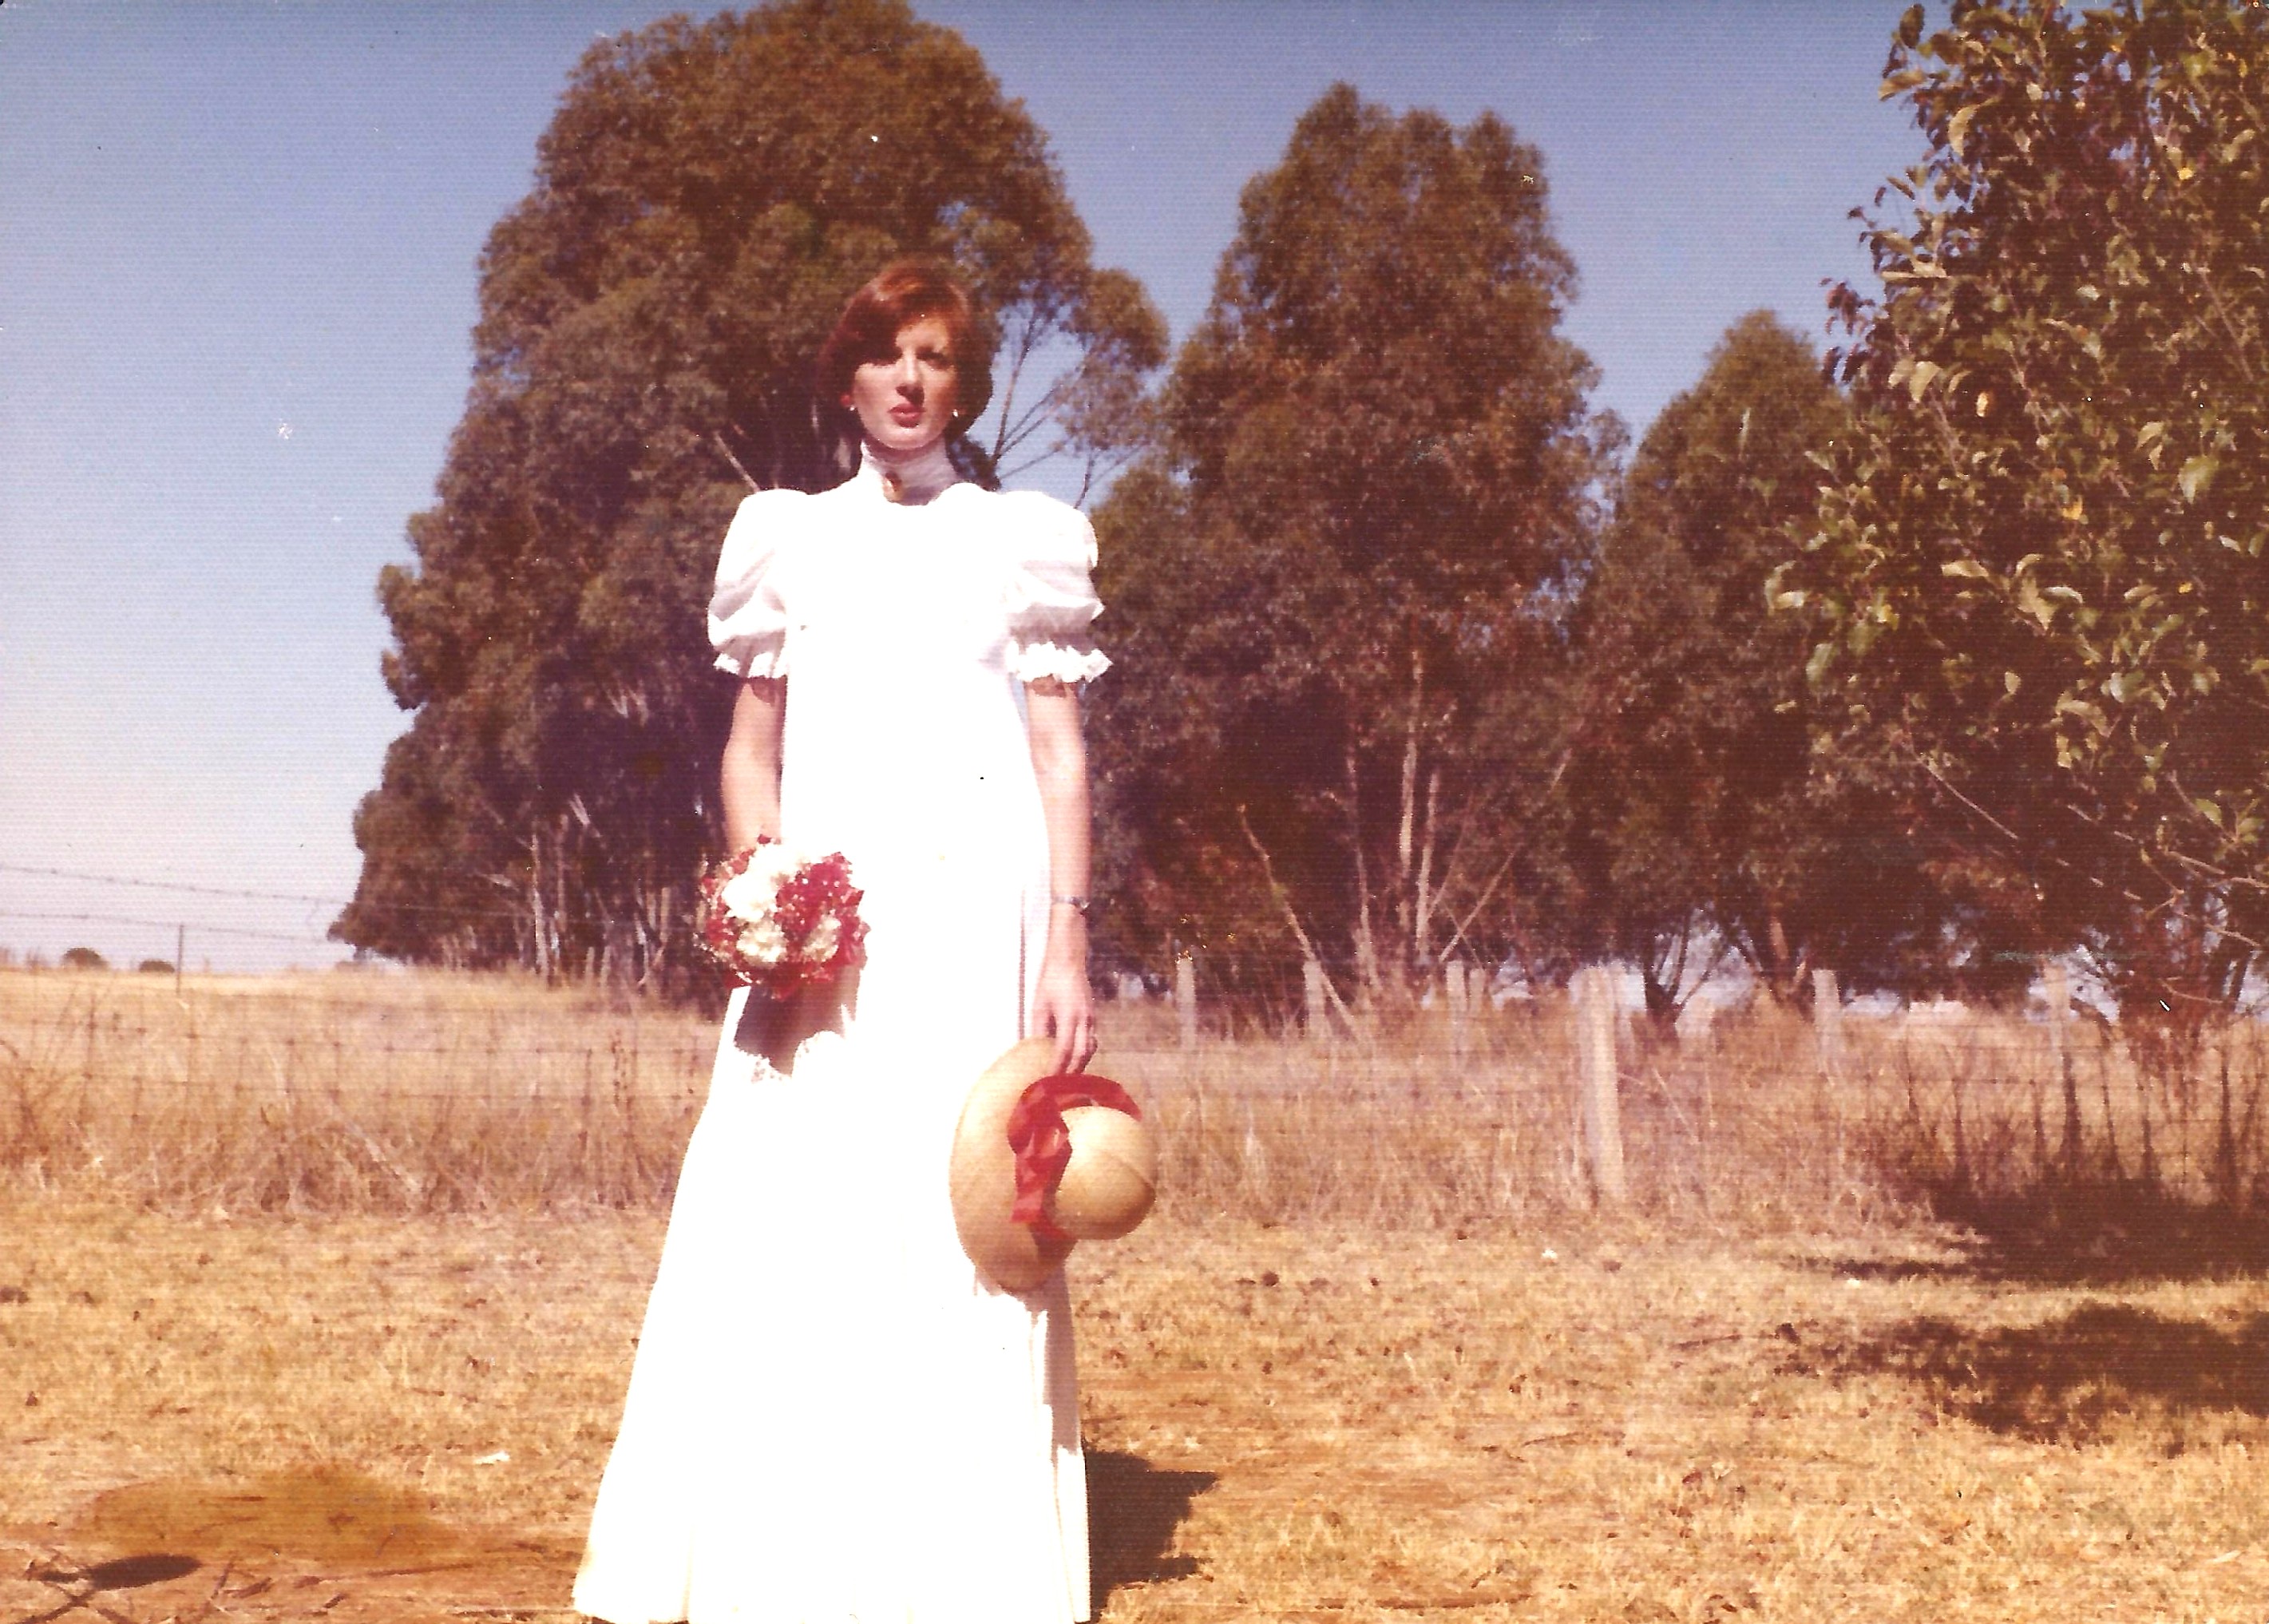 My wedding day 28 Feb 1976 - 21 years and full-time carer